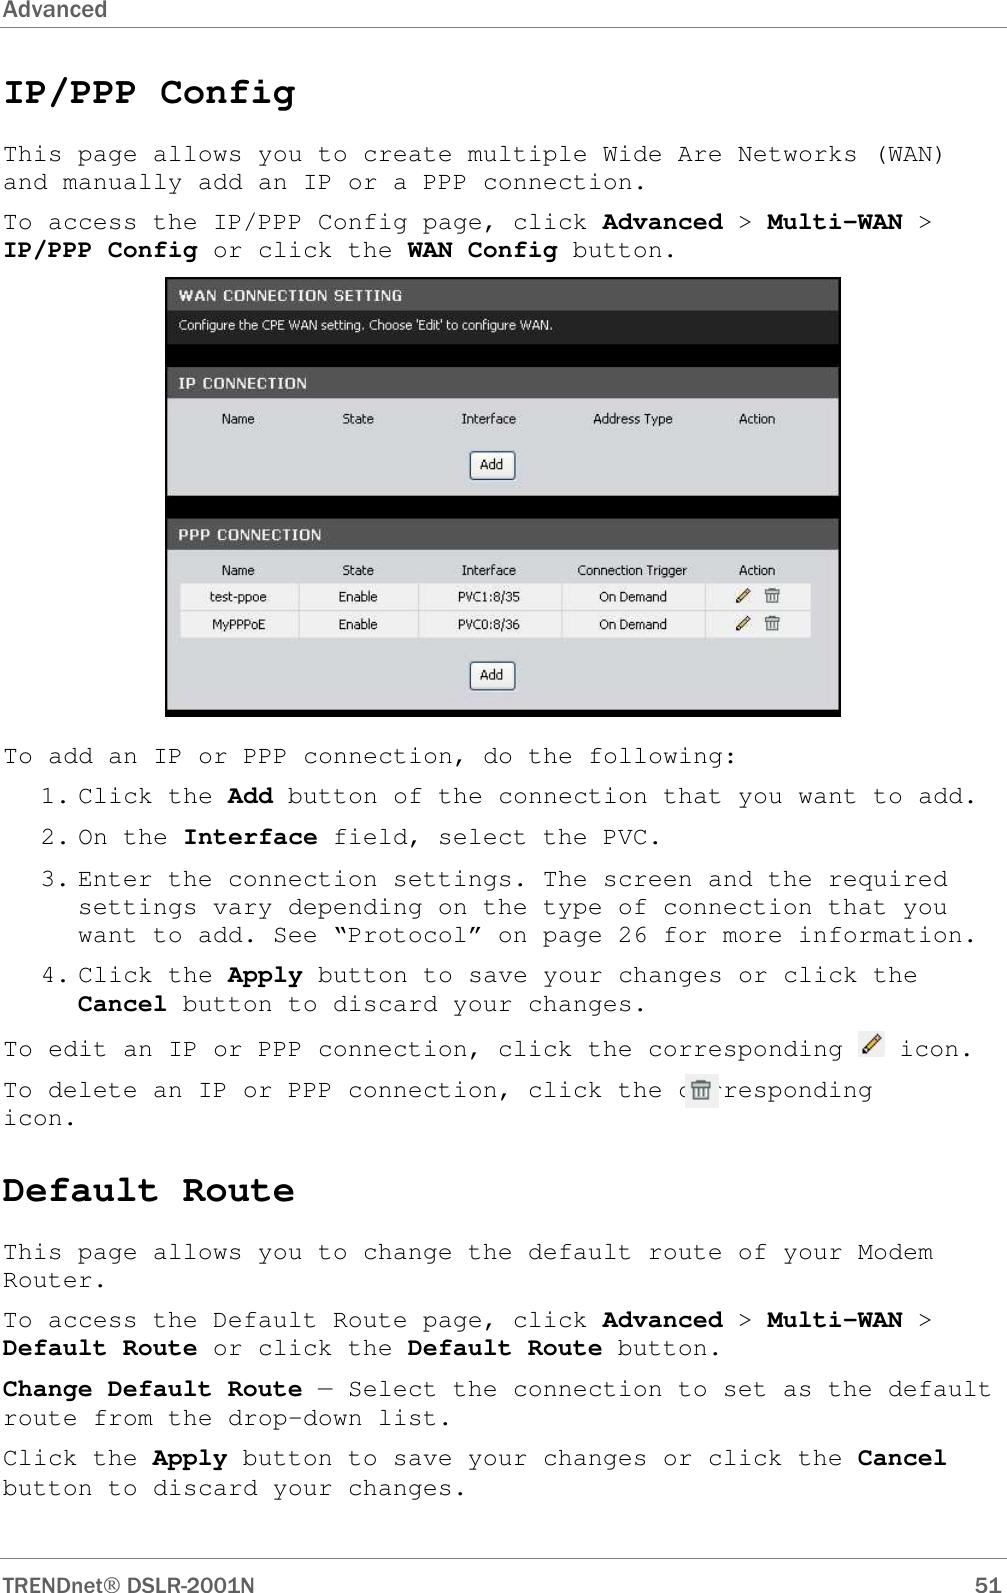 Advanced      TRENDnet DSLR-2001N        51 IP/PPP Config This page allows you to create multiple Wide Are Networks (WAN) and manually add an IP or a PPP connection. To access the IP/PPP Config page, click Advanced &gt; Multi-WAN &gt; IP/PPP Config or click the WAN Config button.  To add an IP or PPP connection, do the following: 1. Click the Add button of the connection that you want to add. 2. On the Interface field, select the PVC. 3. Enter the connection settings. The screen and the required settings vary depending on the type of connection that you want to add. See “Protocol” on page 26 for more information. 4. Click the Apply button to save your changes or click the Cancel button to discard your changes. To edit an IP or PPP connection, click the corresponding   icon. To delete an IP or PPP connection, click the corresponding      icon. Default Route This page allows you to change the default route of your Modem Router. To access the Default Route page, click Advanced &gt; Multi-WAN &gt; Default Route or click the Default Route button. Change Default Route — Select the connection to set as the default route from the drop-down list. Click the Apply button to save your changes or click the Cancel button to discard your changes. 